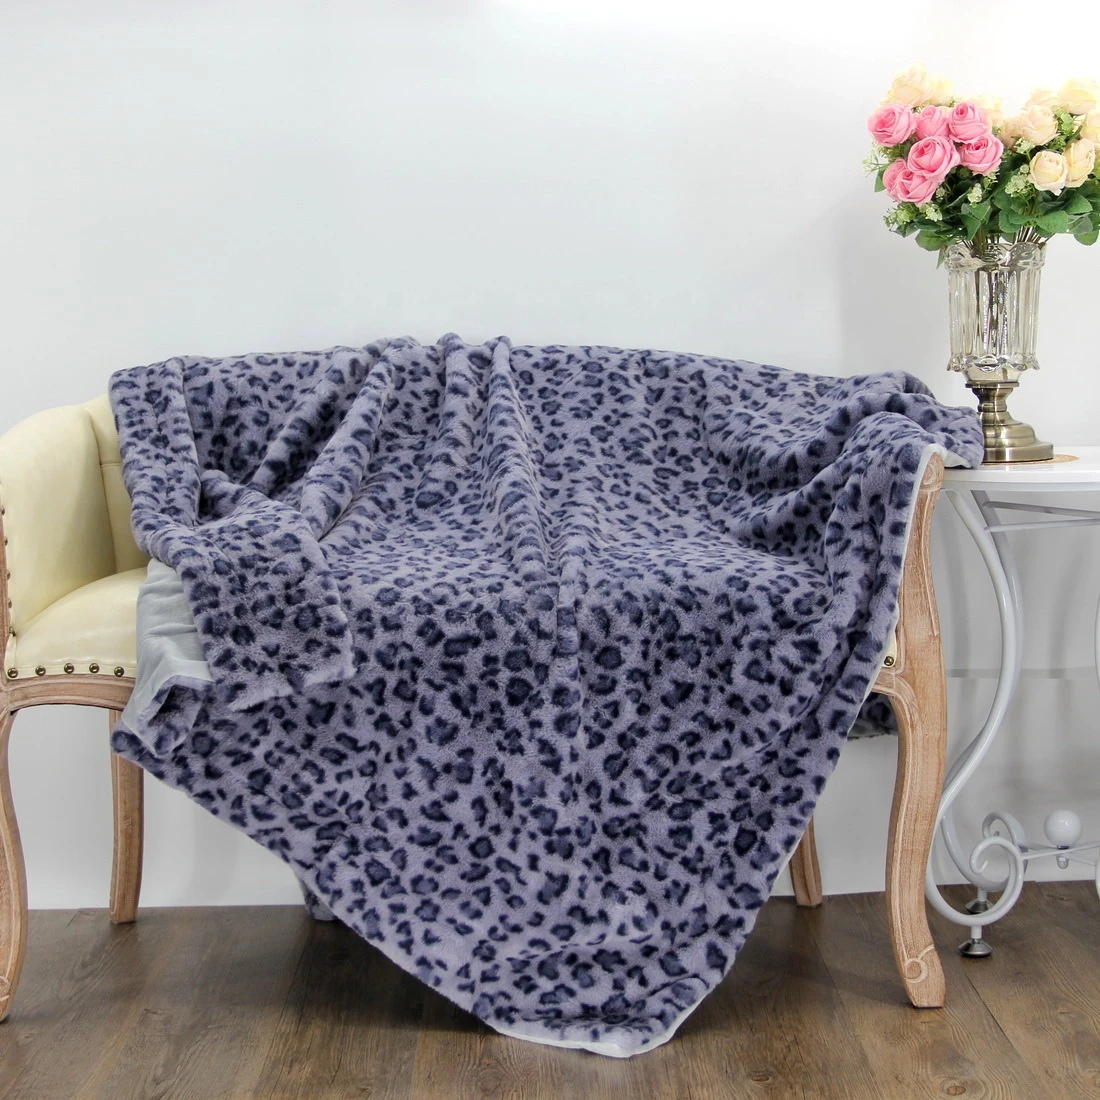 Polyester Soft Fluffy Throw Blankets Grey 2021 New Throw Leopard Printed Faux Fur 130x160cm Arrival Manta Animals Acceptable